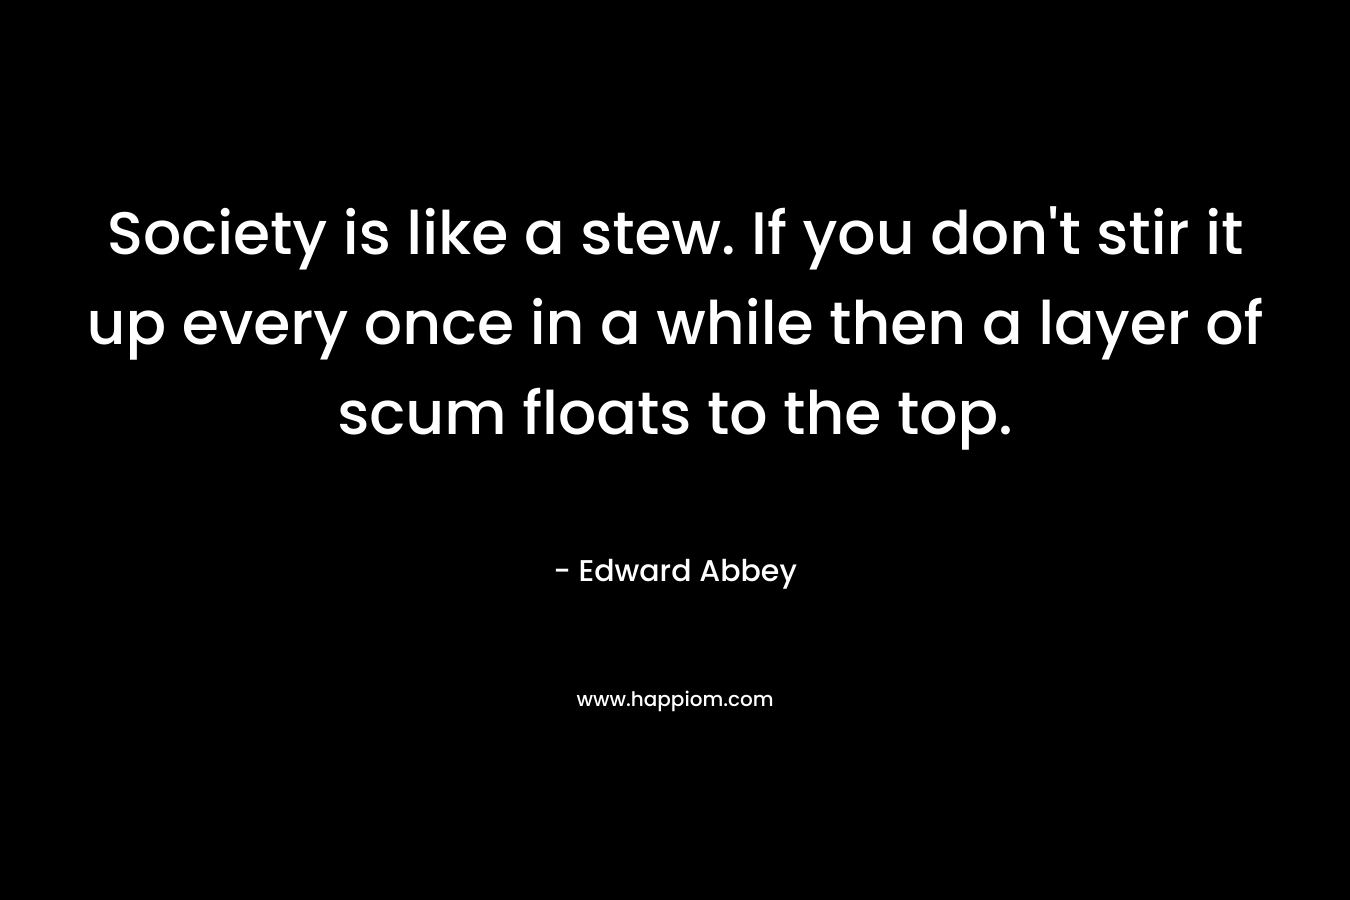 Society is like a stew. If you don't stir it up every once in a while then a layer of scum floats to the top.